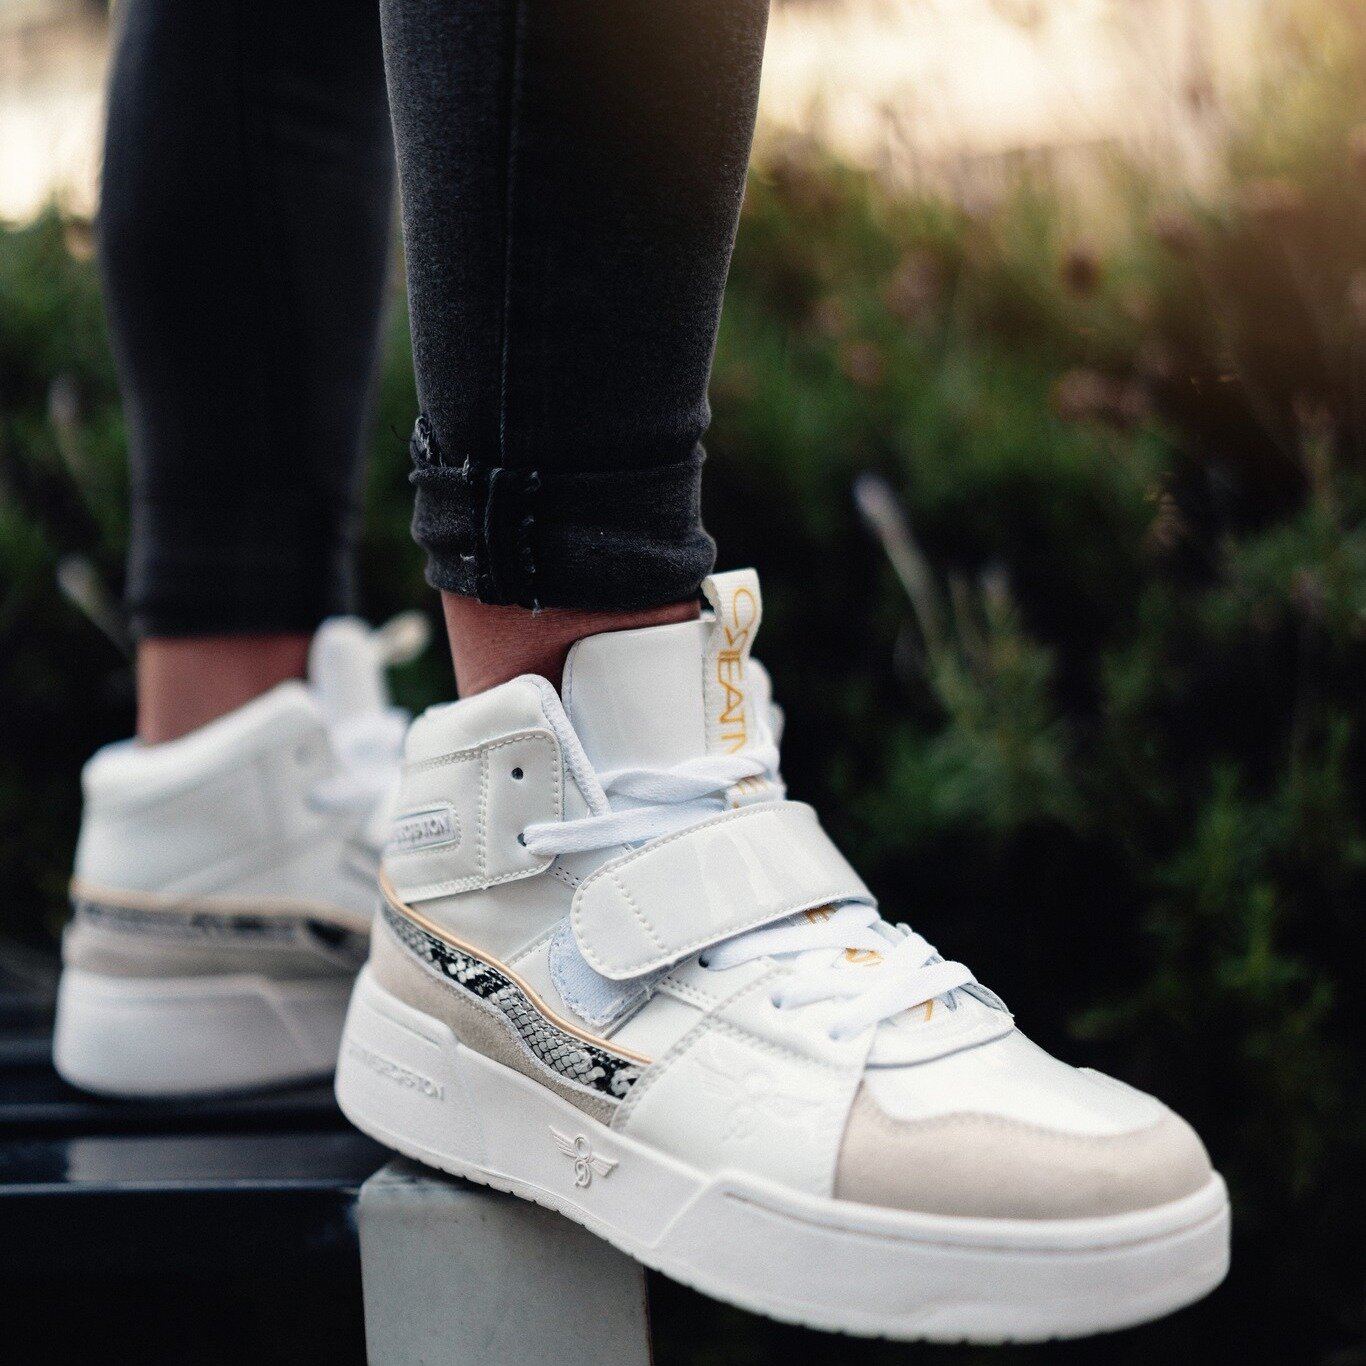 Our newest ladies model Stella is now available.  Visit our website for the newest Spring Collection. 

#springfootwear #sneakers #fashionsneakers #newcollection2023 #instalike #Sneakerblog